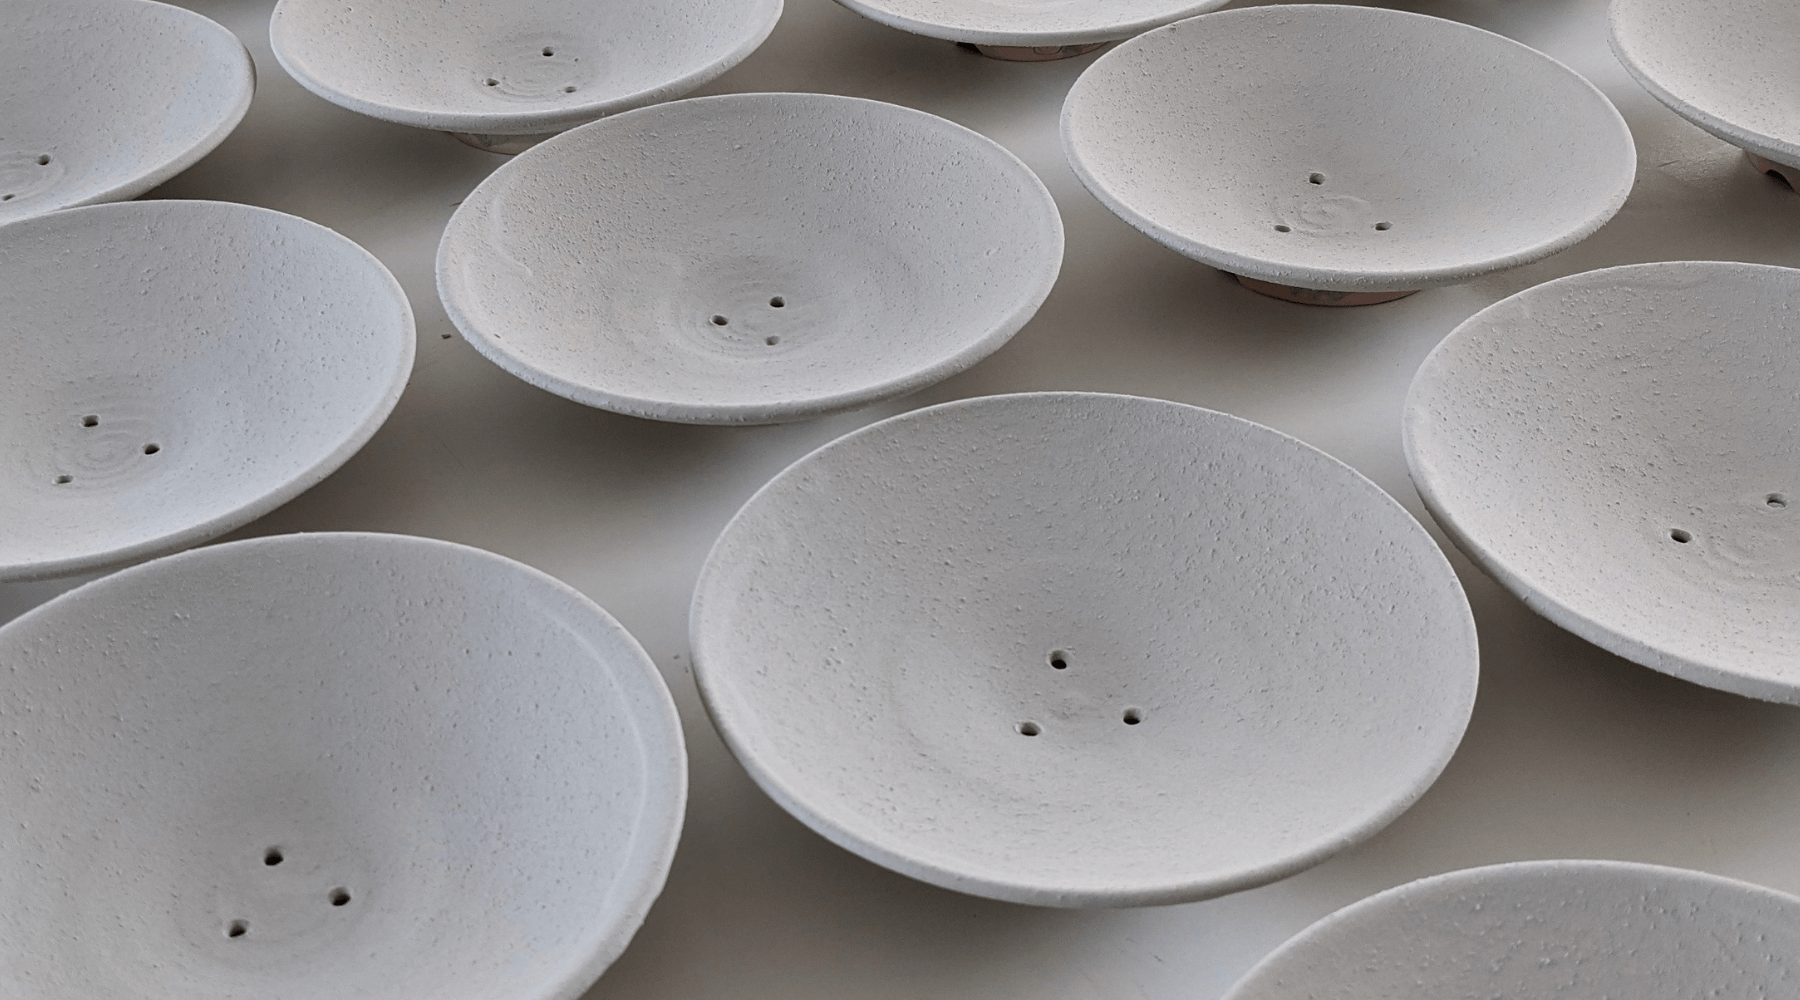 Ceramic Soap Dishes with Tom Knowles Jackson